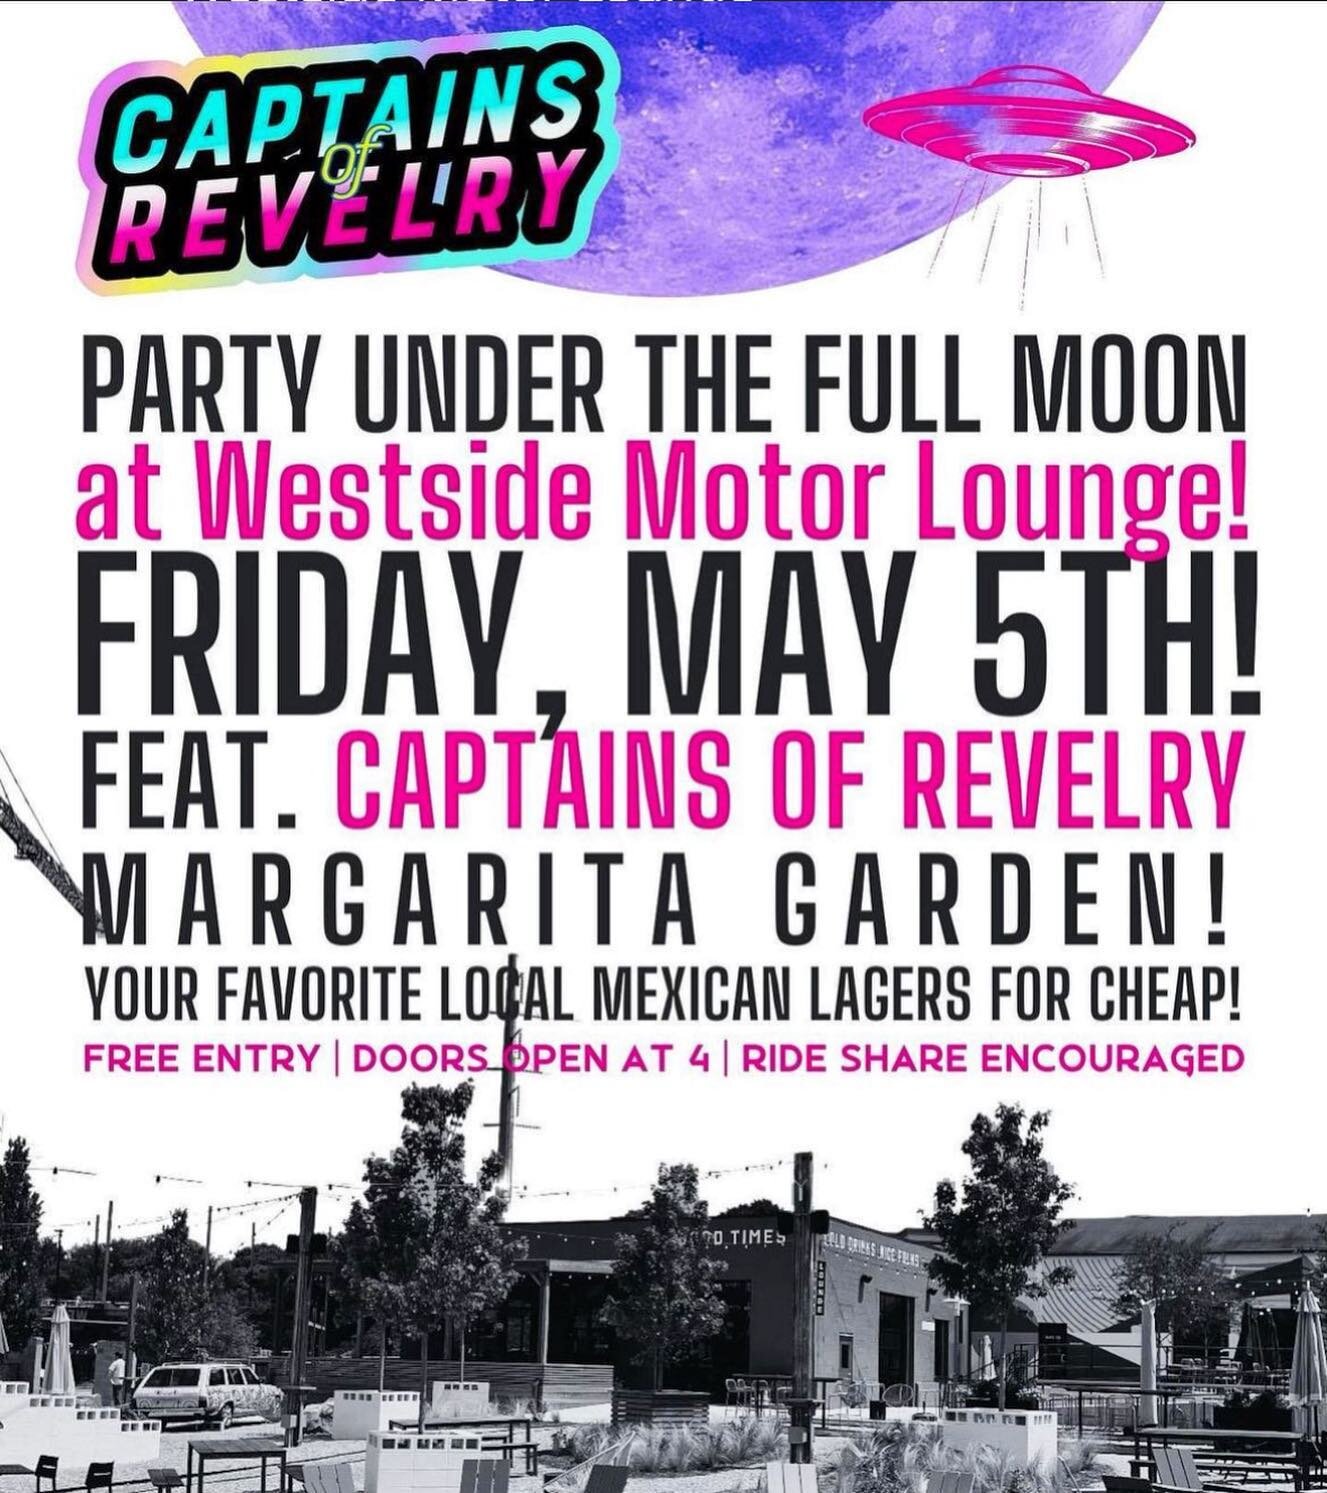 Tonight&rsquo;s the night! FREE @captainsofrevelry Cinco De Mayo party from 5pm-11 at the @westside_motor_lounge!
Set times:
@mattsilliman_dj: 6-8
@mikelastrange: 8-9:30
@djkeiran: 9:30-11.
Let&rsquo;s dance!!